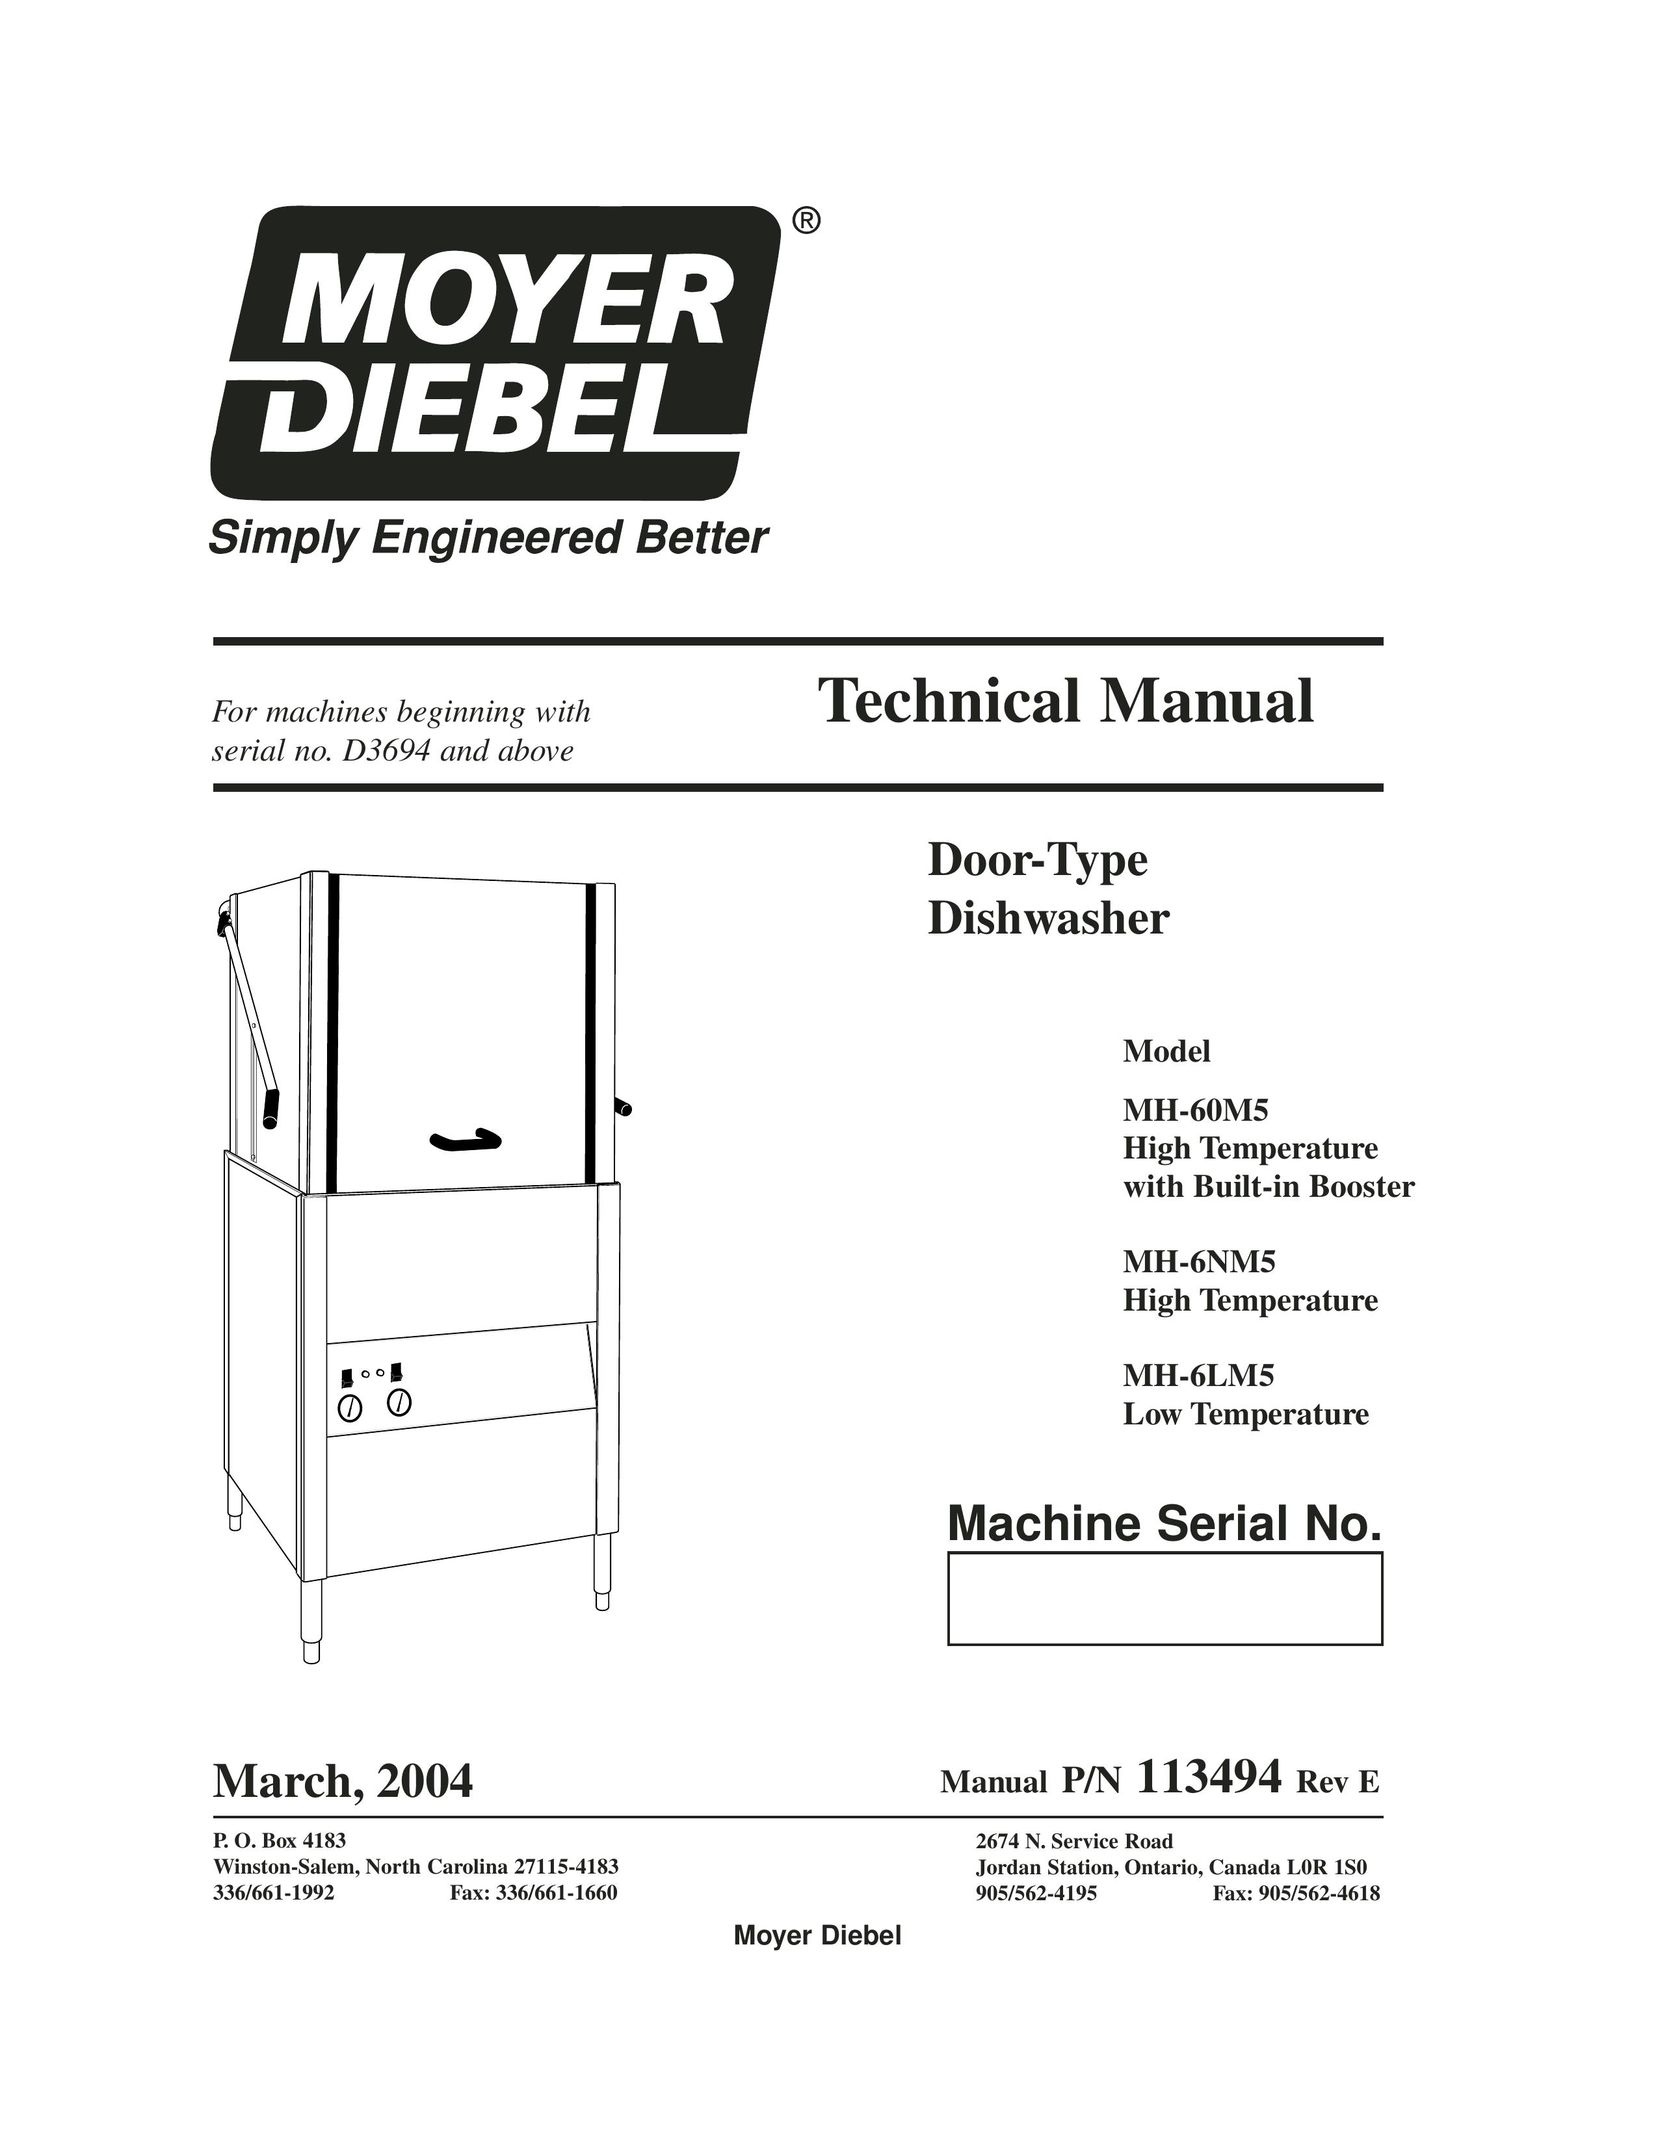 Moyer Diebel MH-6LM5 Dishwasher User Manual